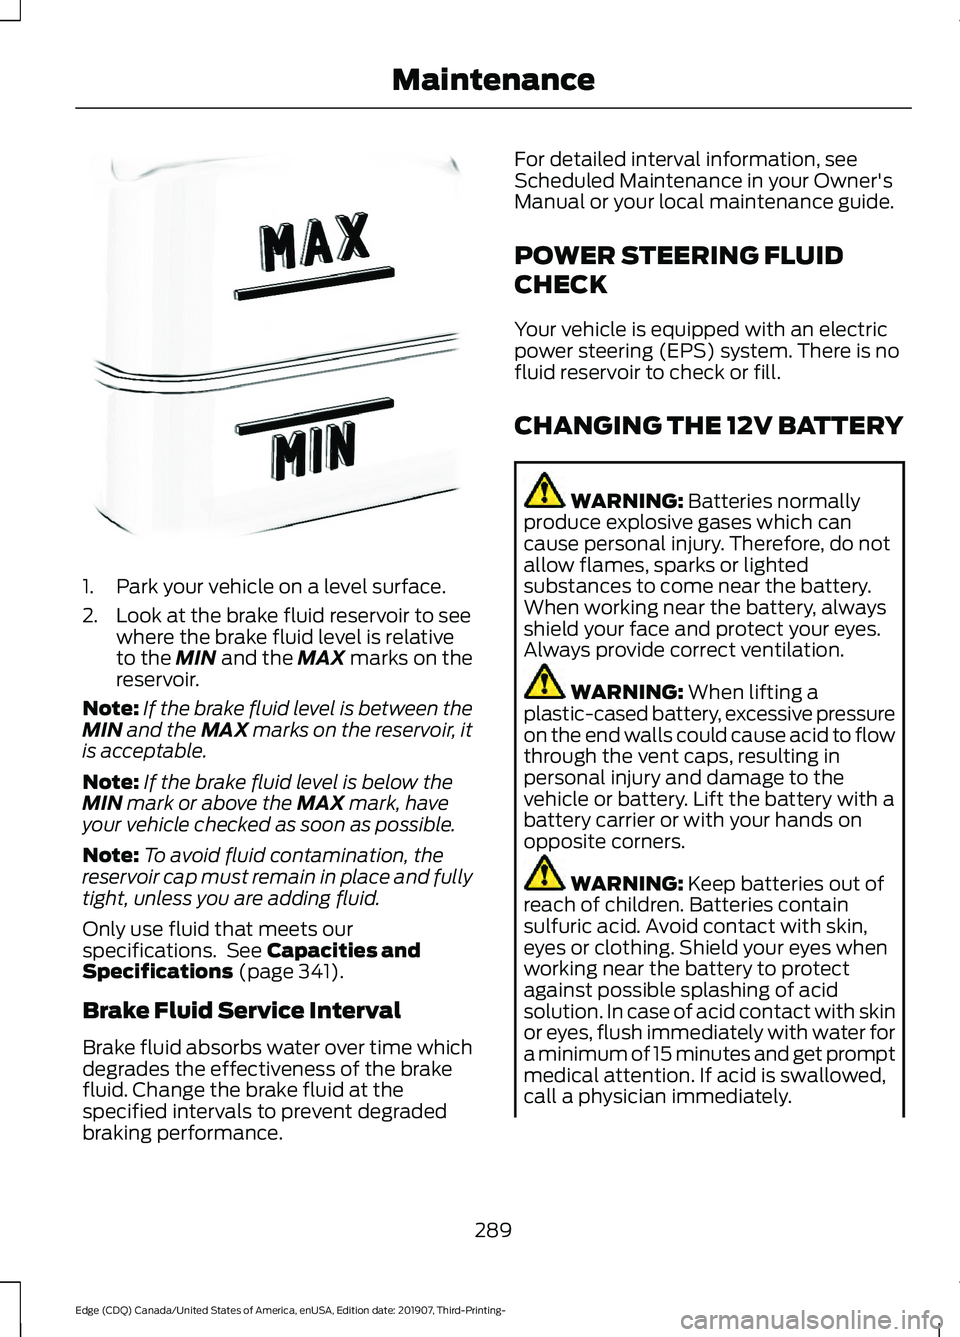 FORD EDGE 2020 Service Manual 1. Park your vehicle on a level surface.
2. Look at the brake fluid reservoir to see
where the brake fluid level is relative
to the MIN and the MAX marks on the
reservoir.
Note: If the brake fluid lev